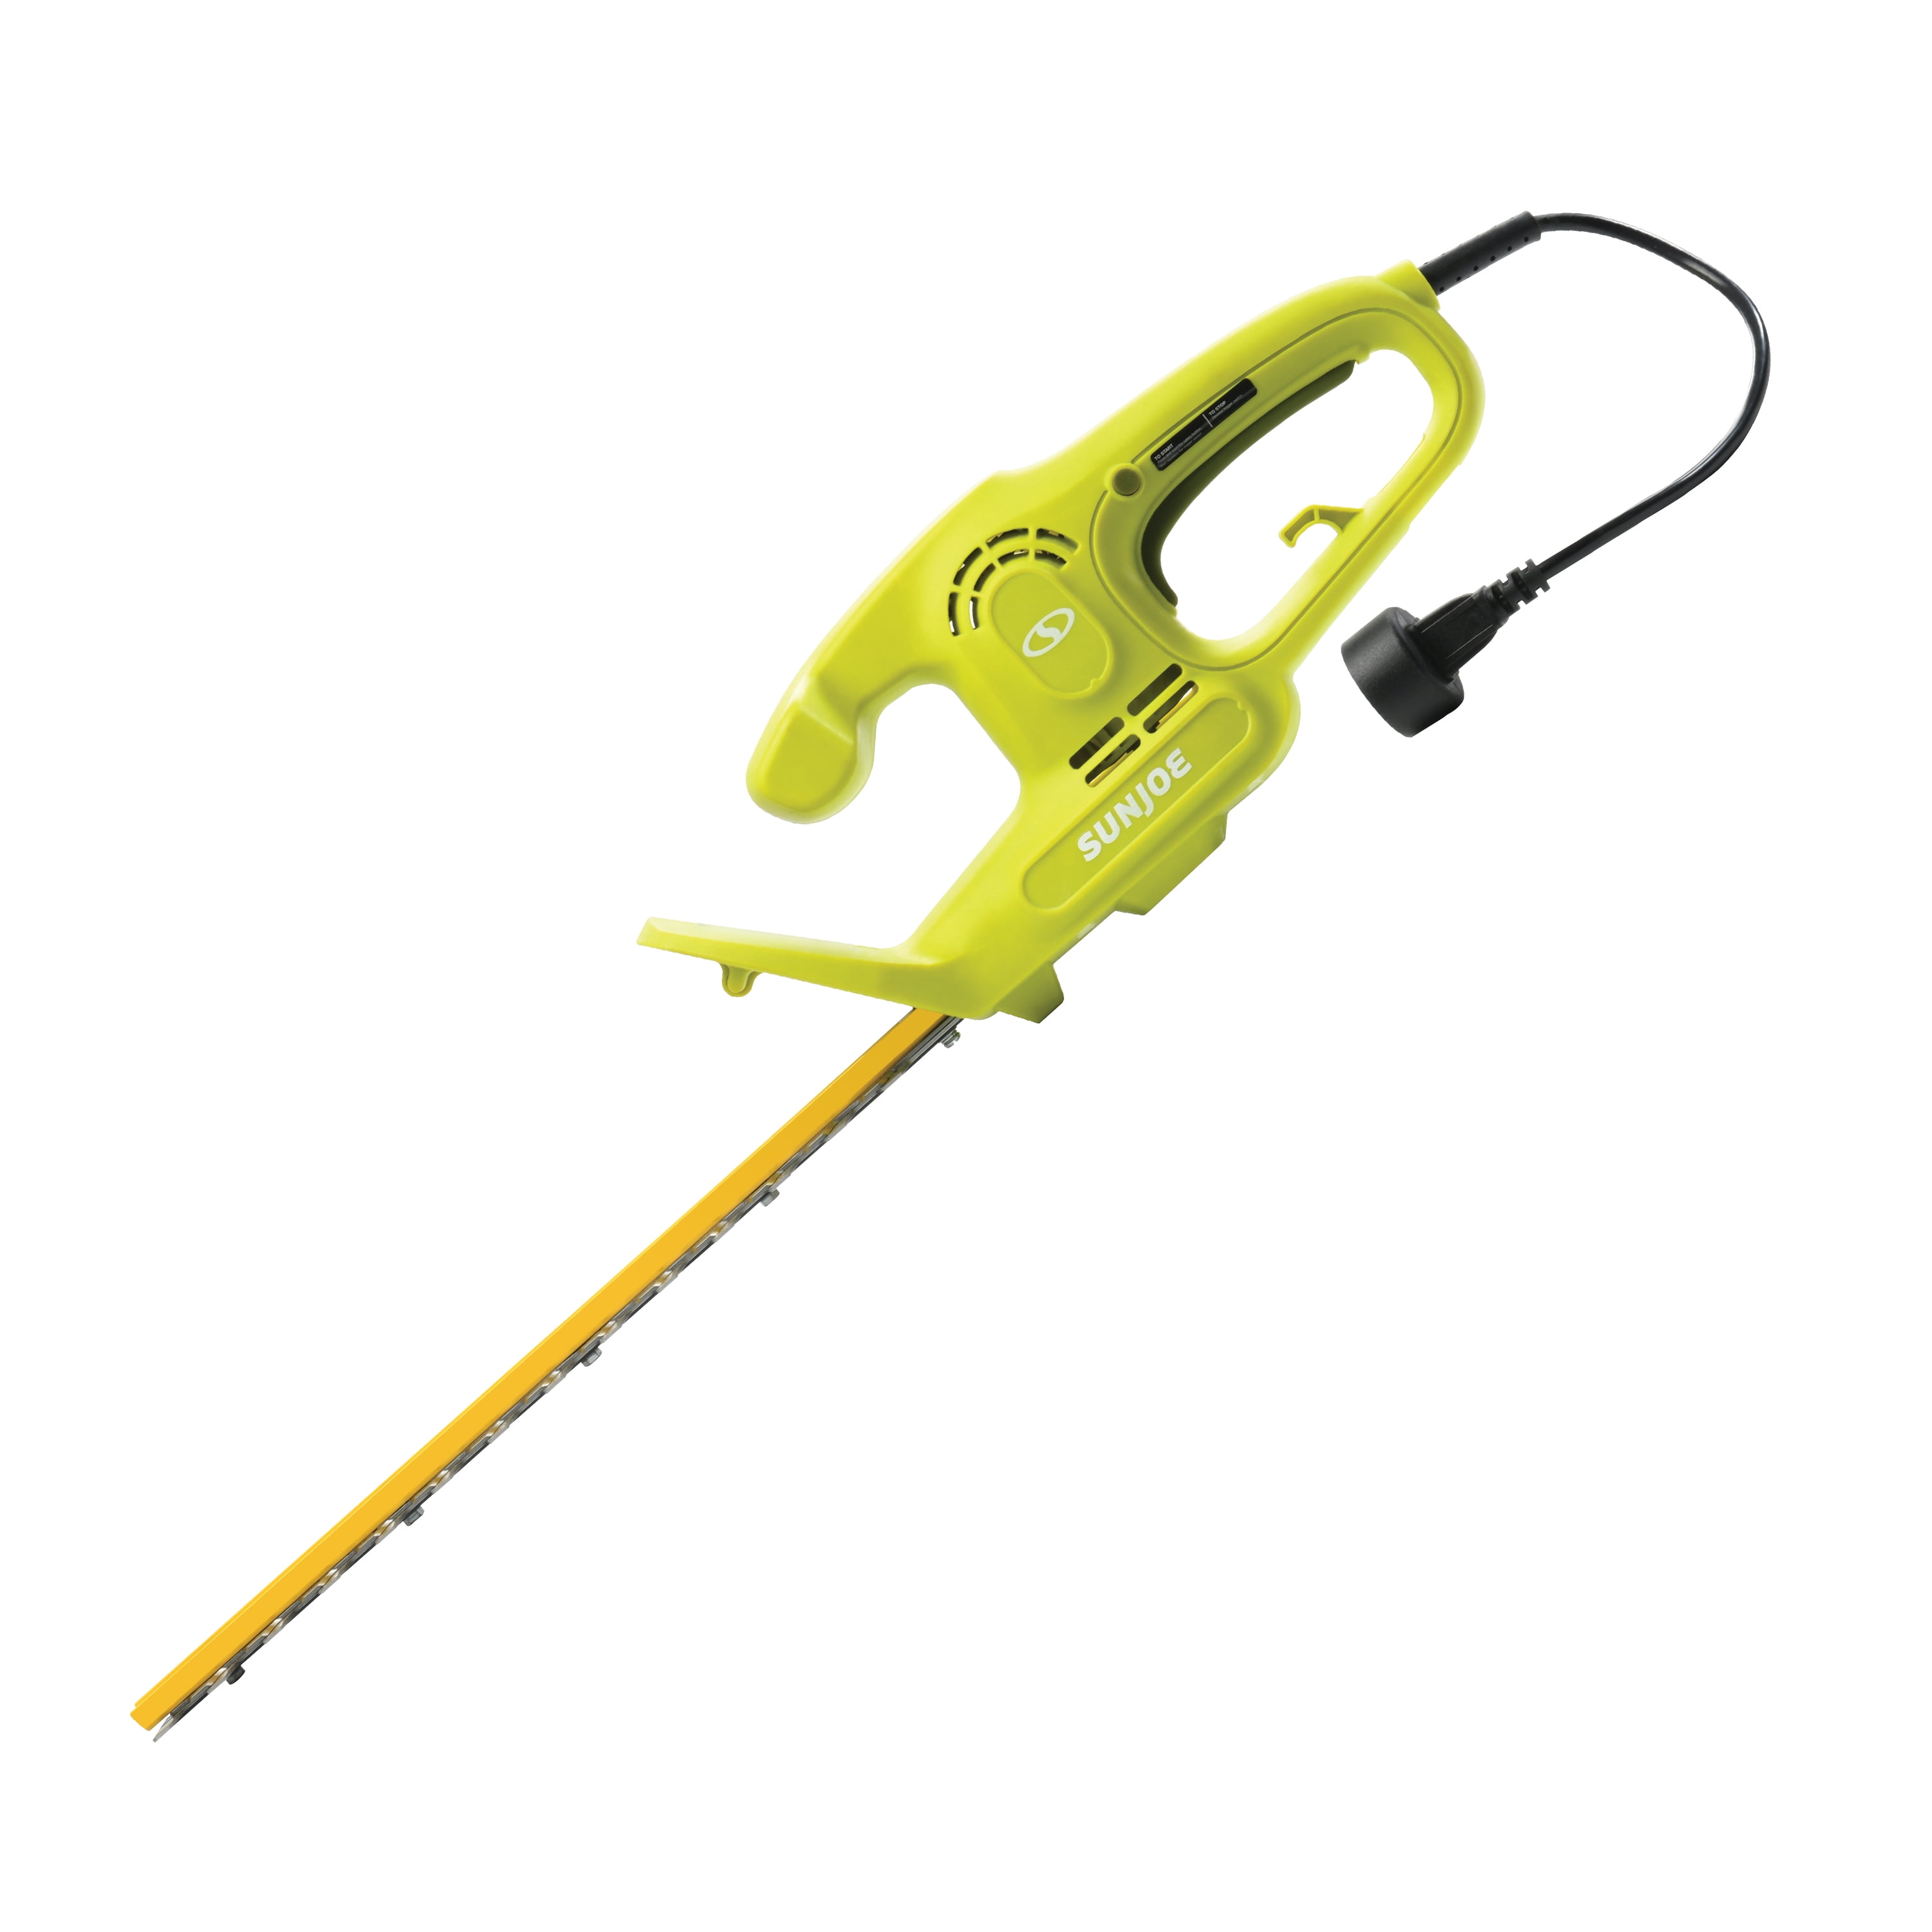 electric hedge trimmer walmart